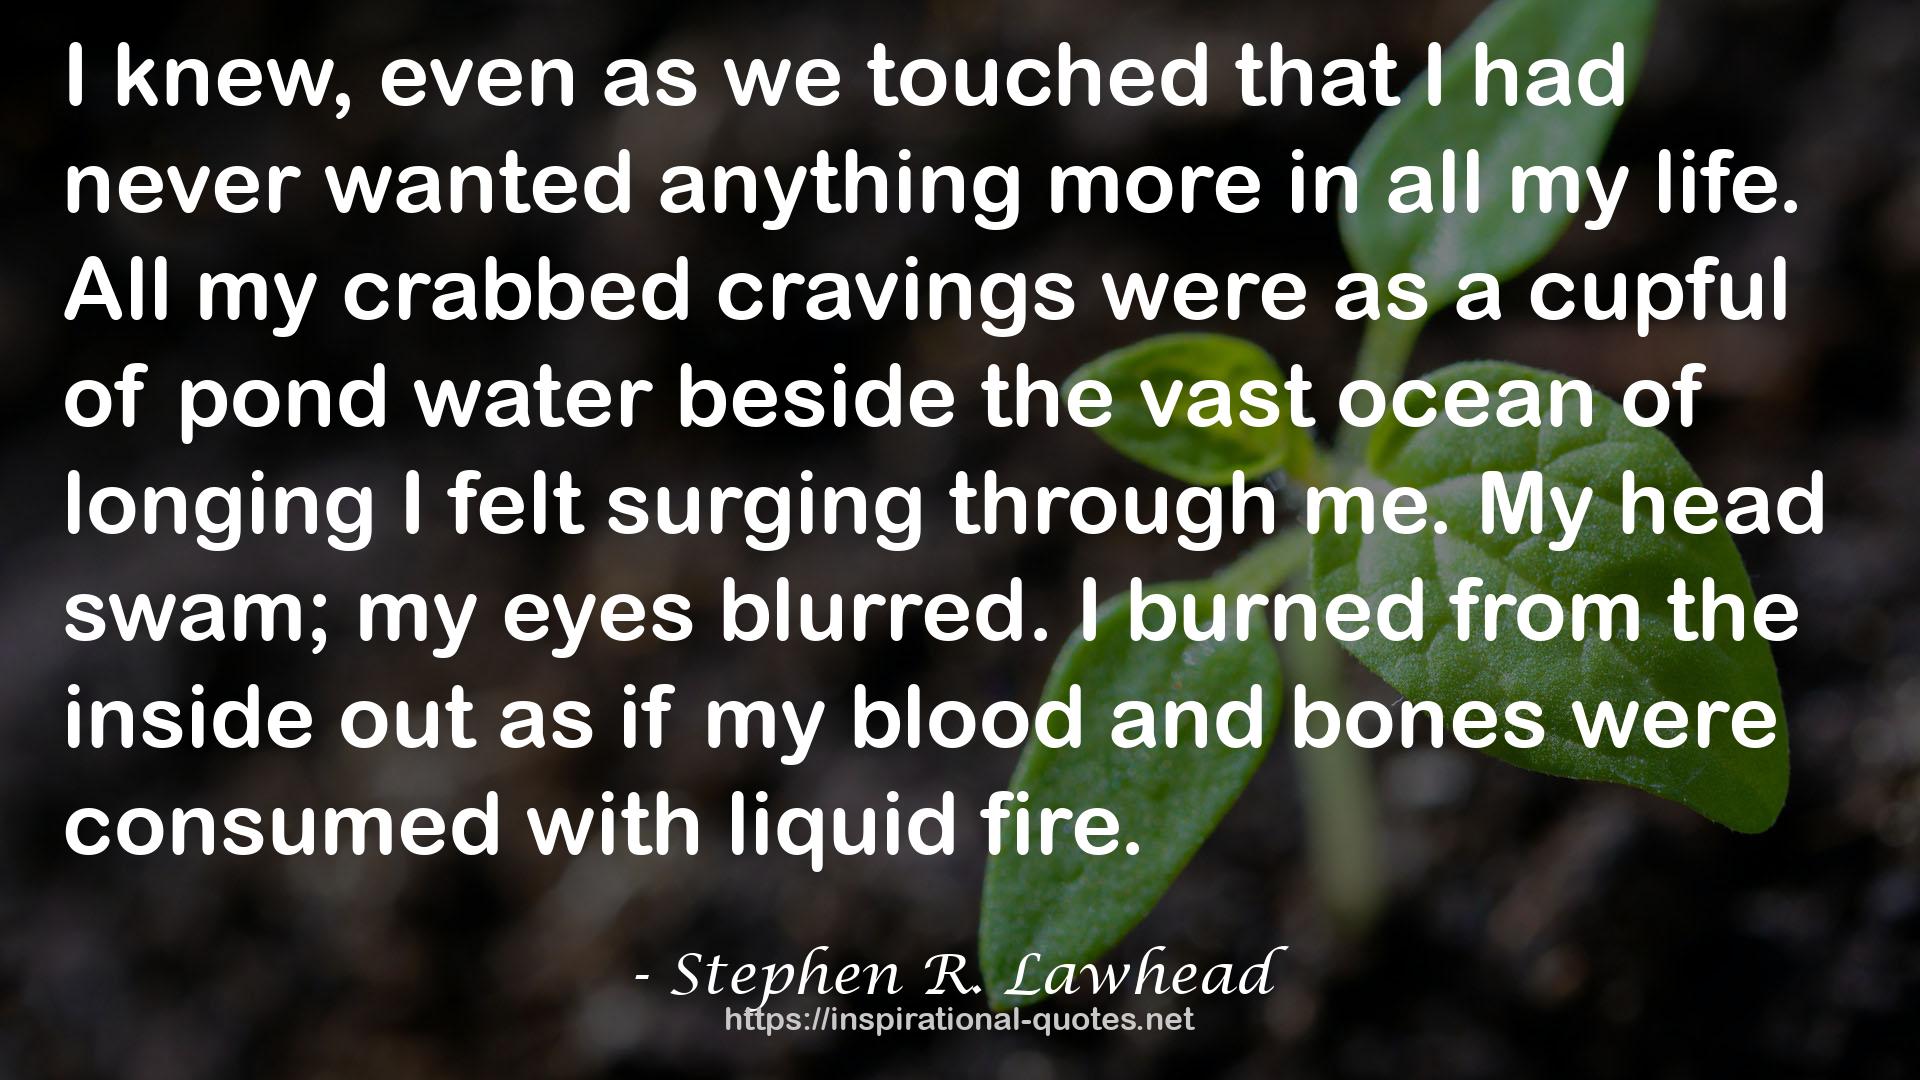 Stephen R. Lawhead QUOTES